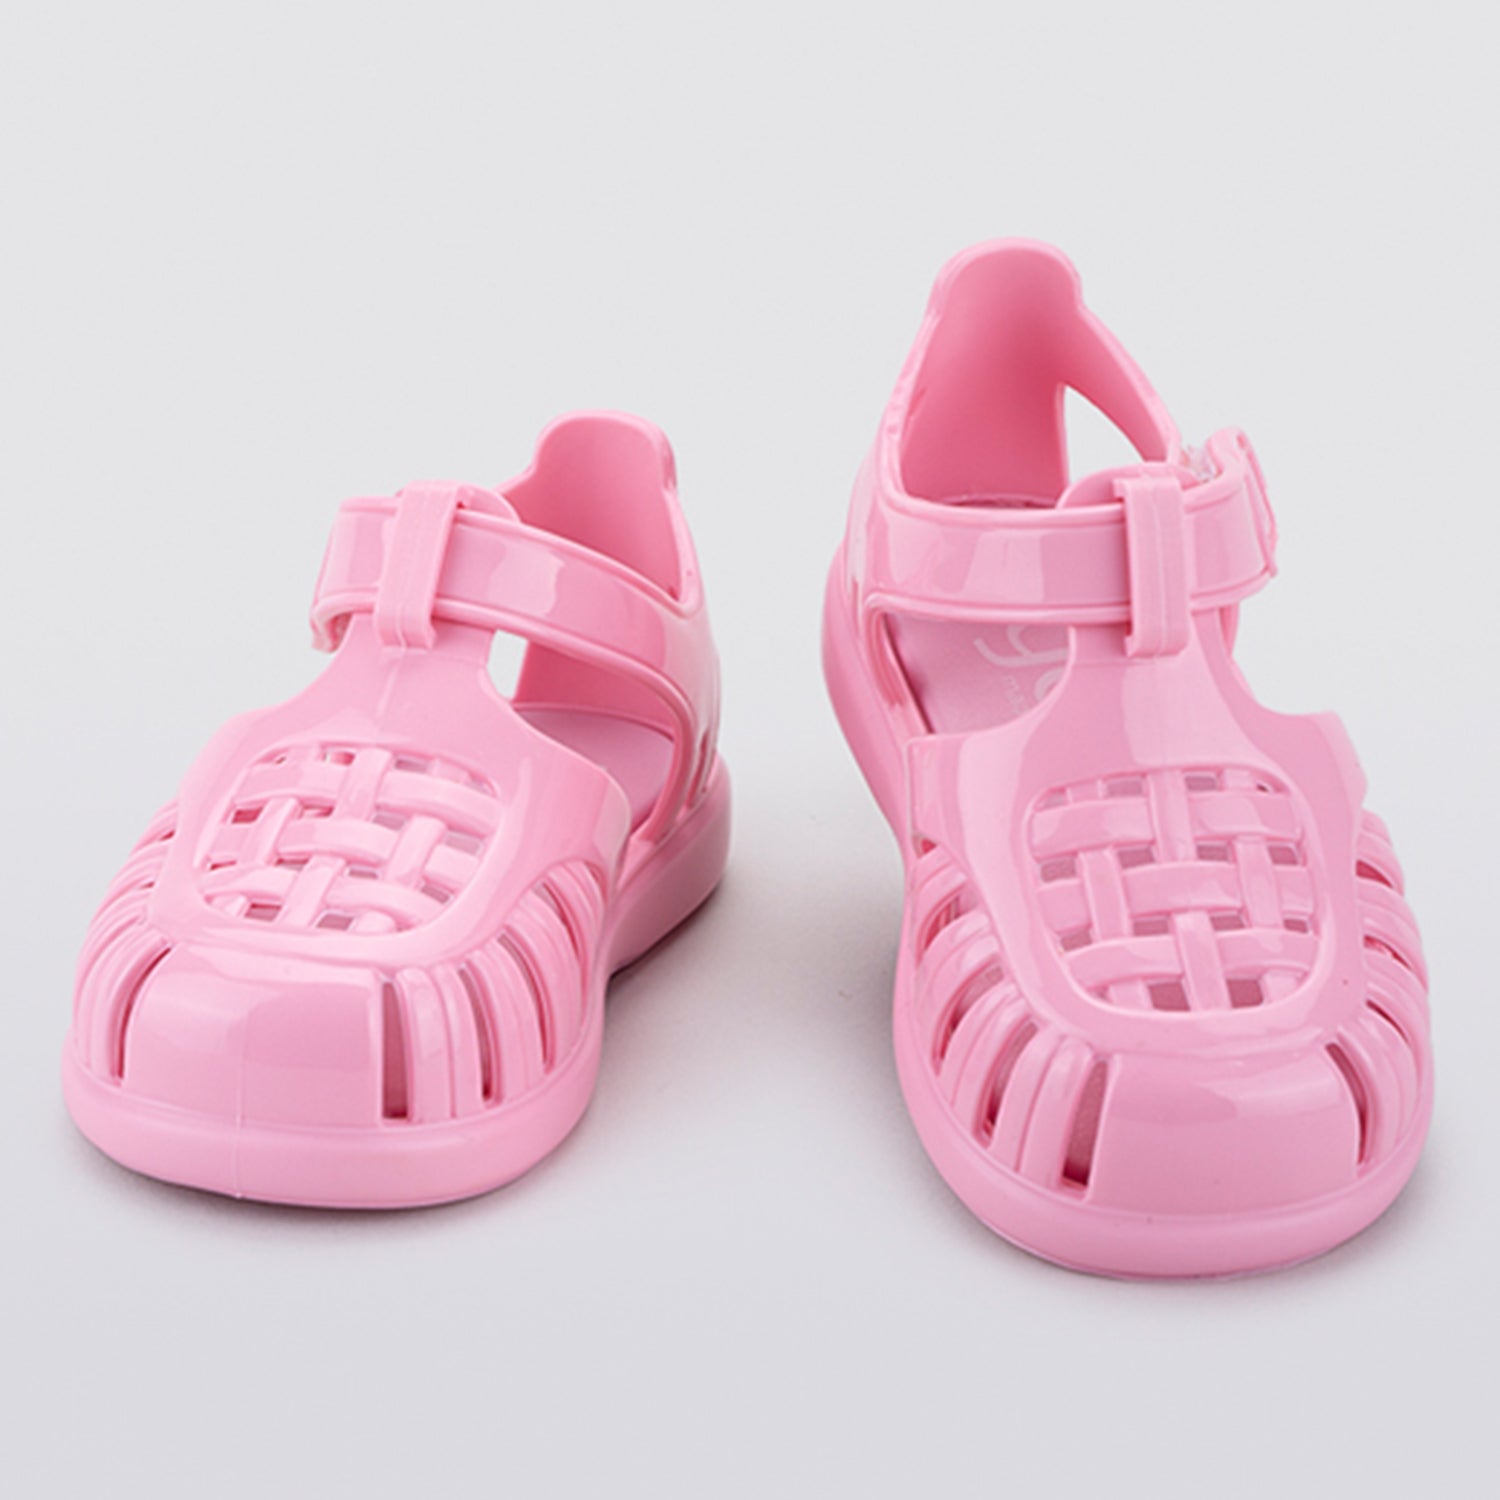 Pale Pink Cage Jellies